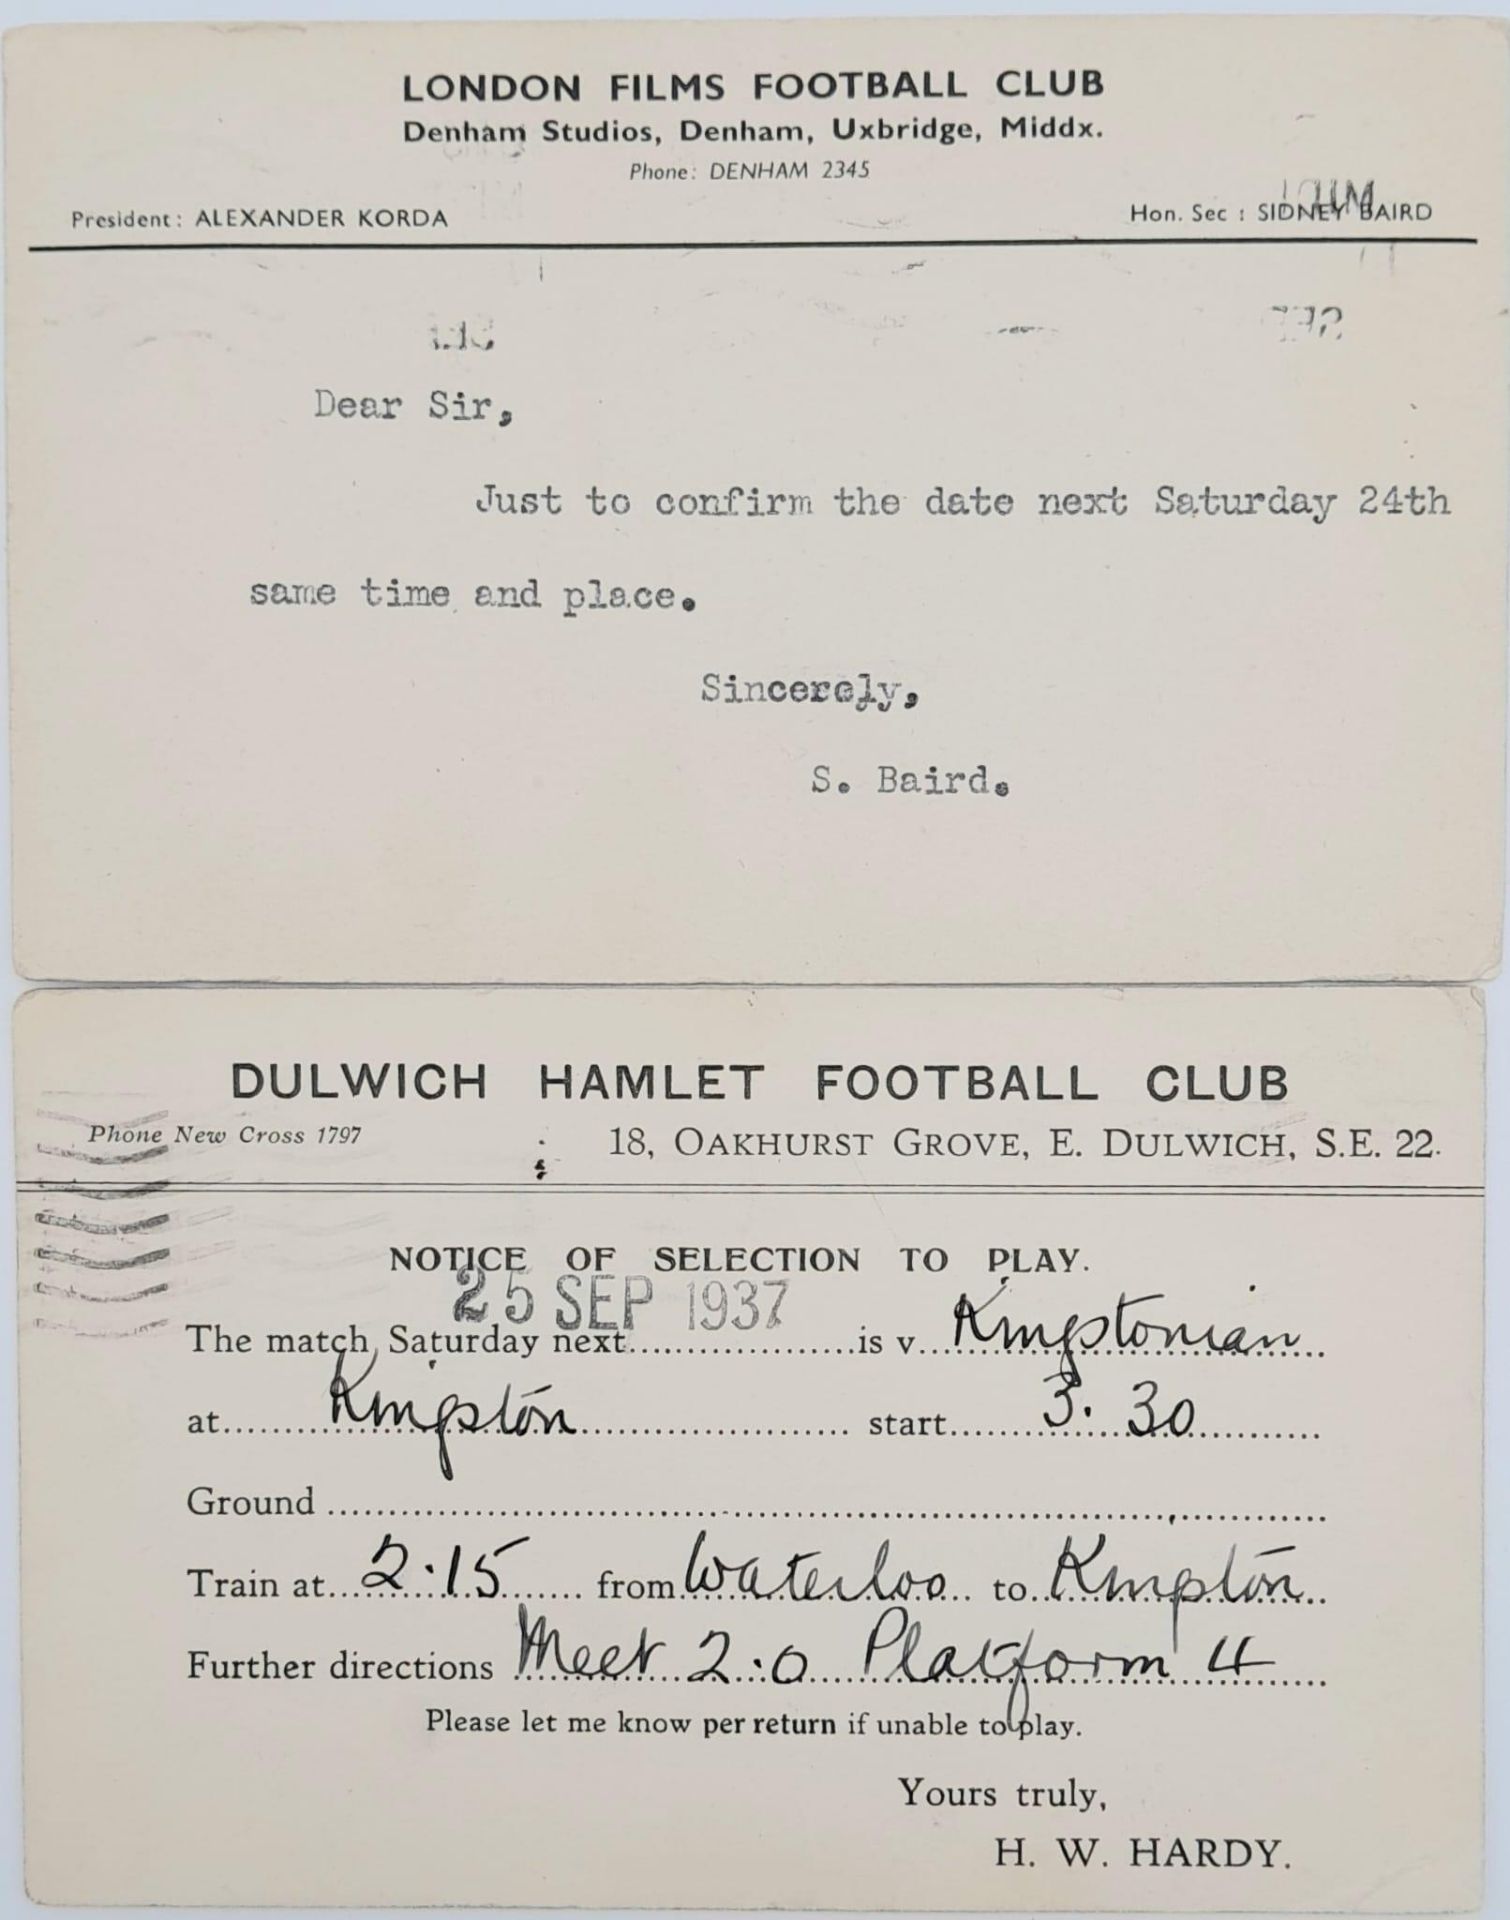 An Eclectic Piece of Football Memorabilia - Two letters from London Films football club believe to - Image 5 of 5